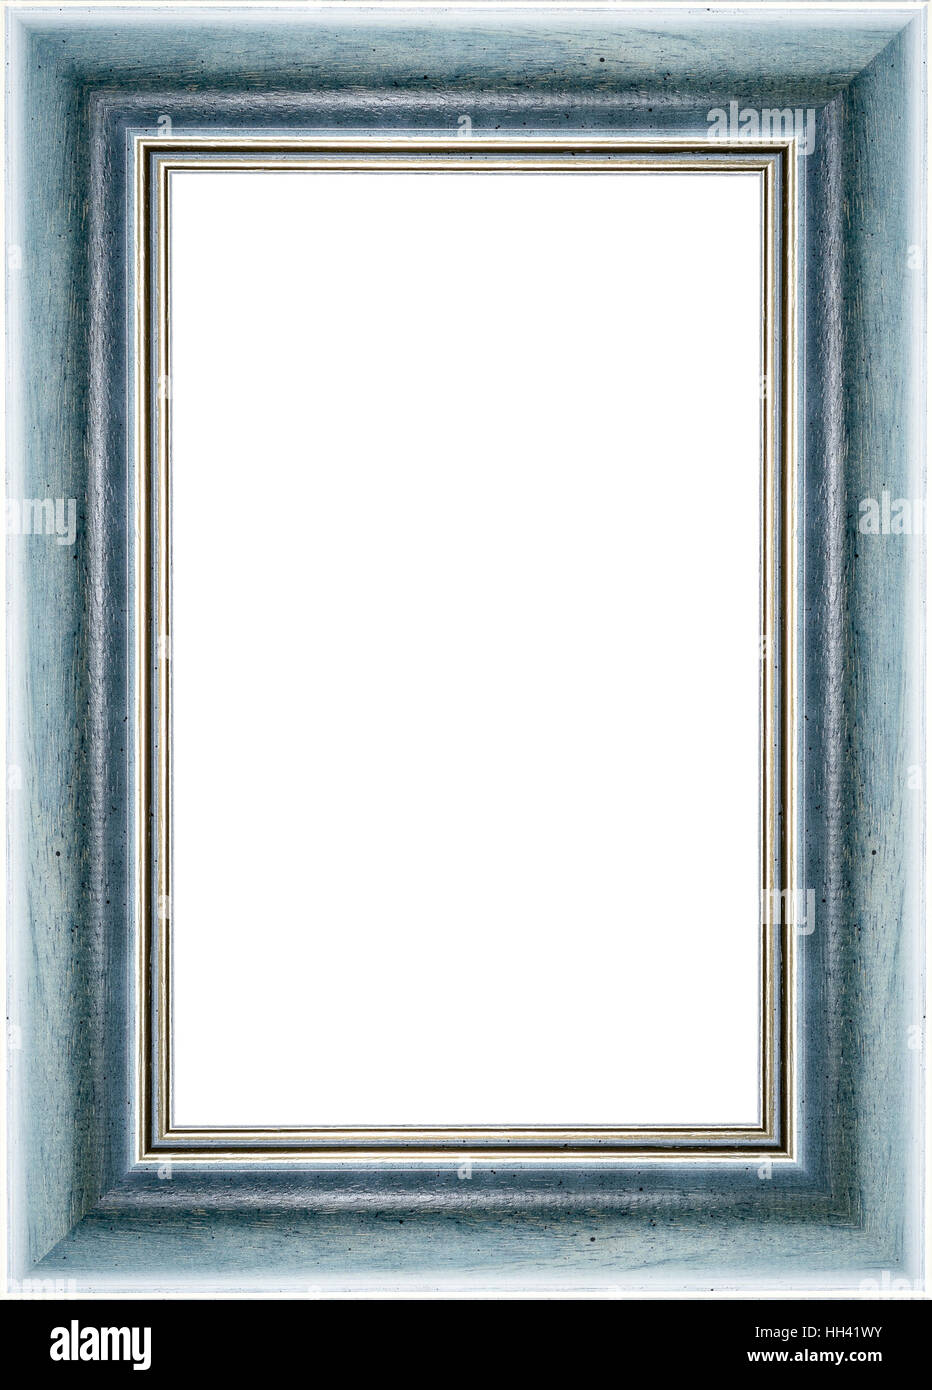 Wooden blue vintage picture frame isolated on white background. High resolution photo. Stock Photo